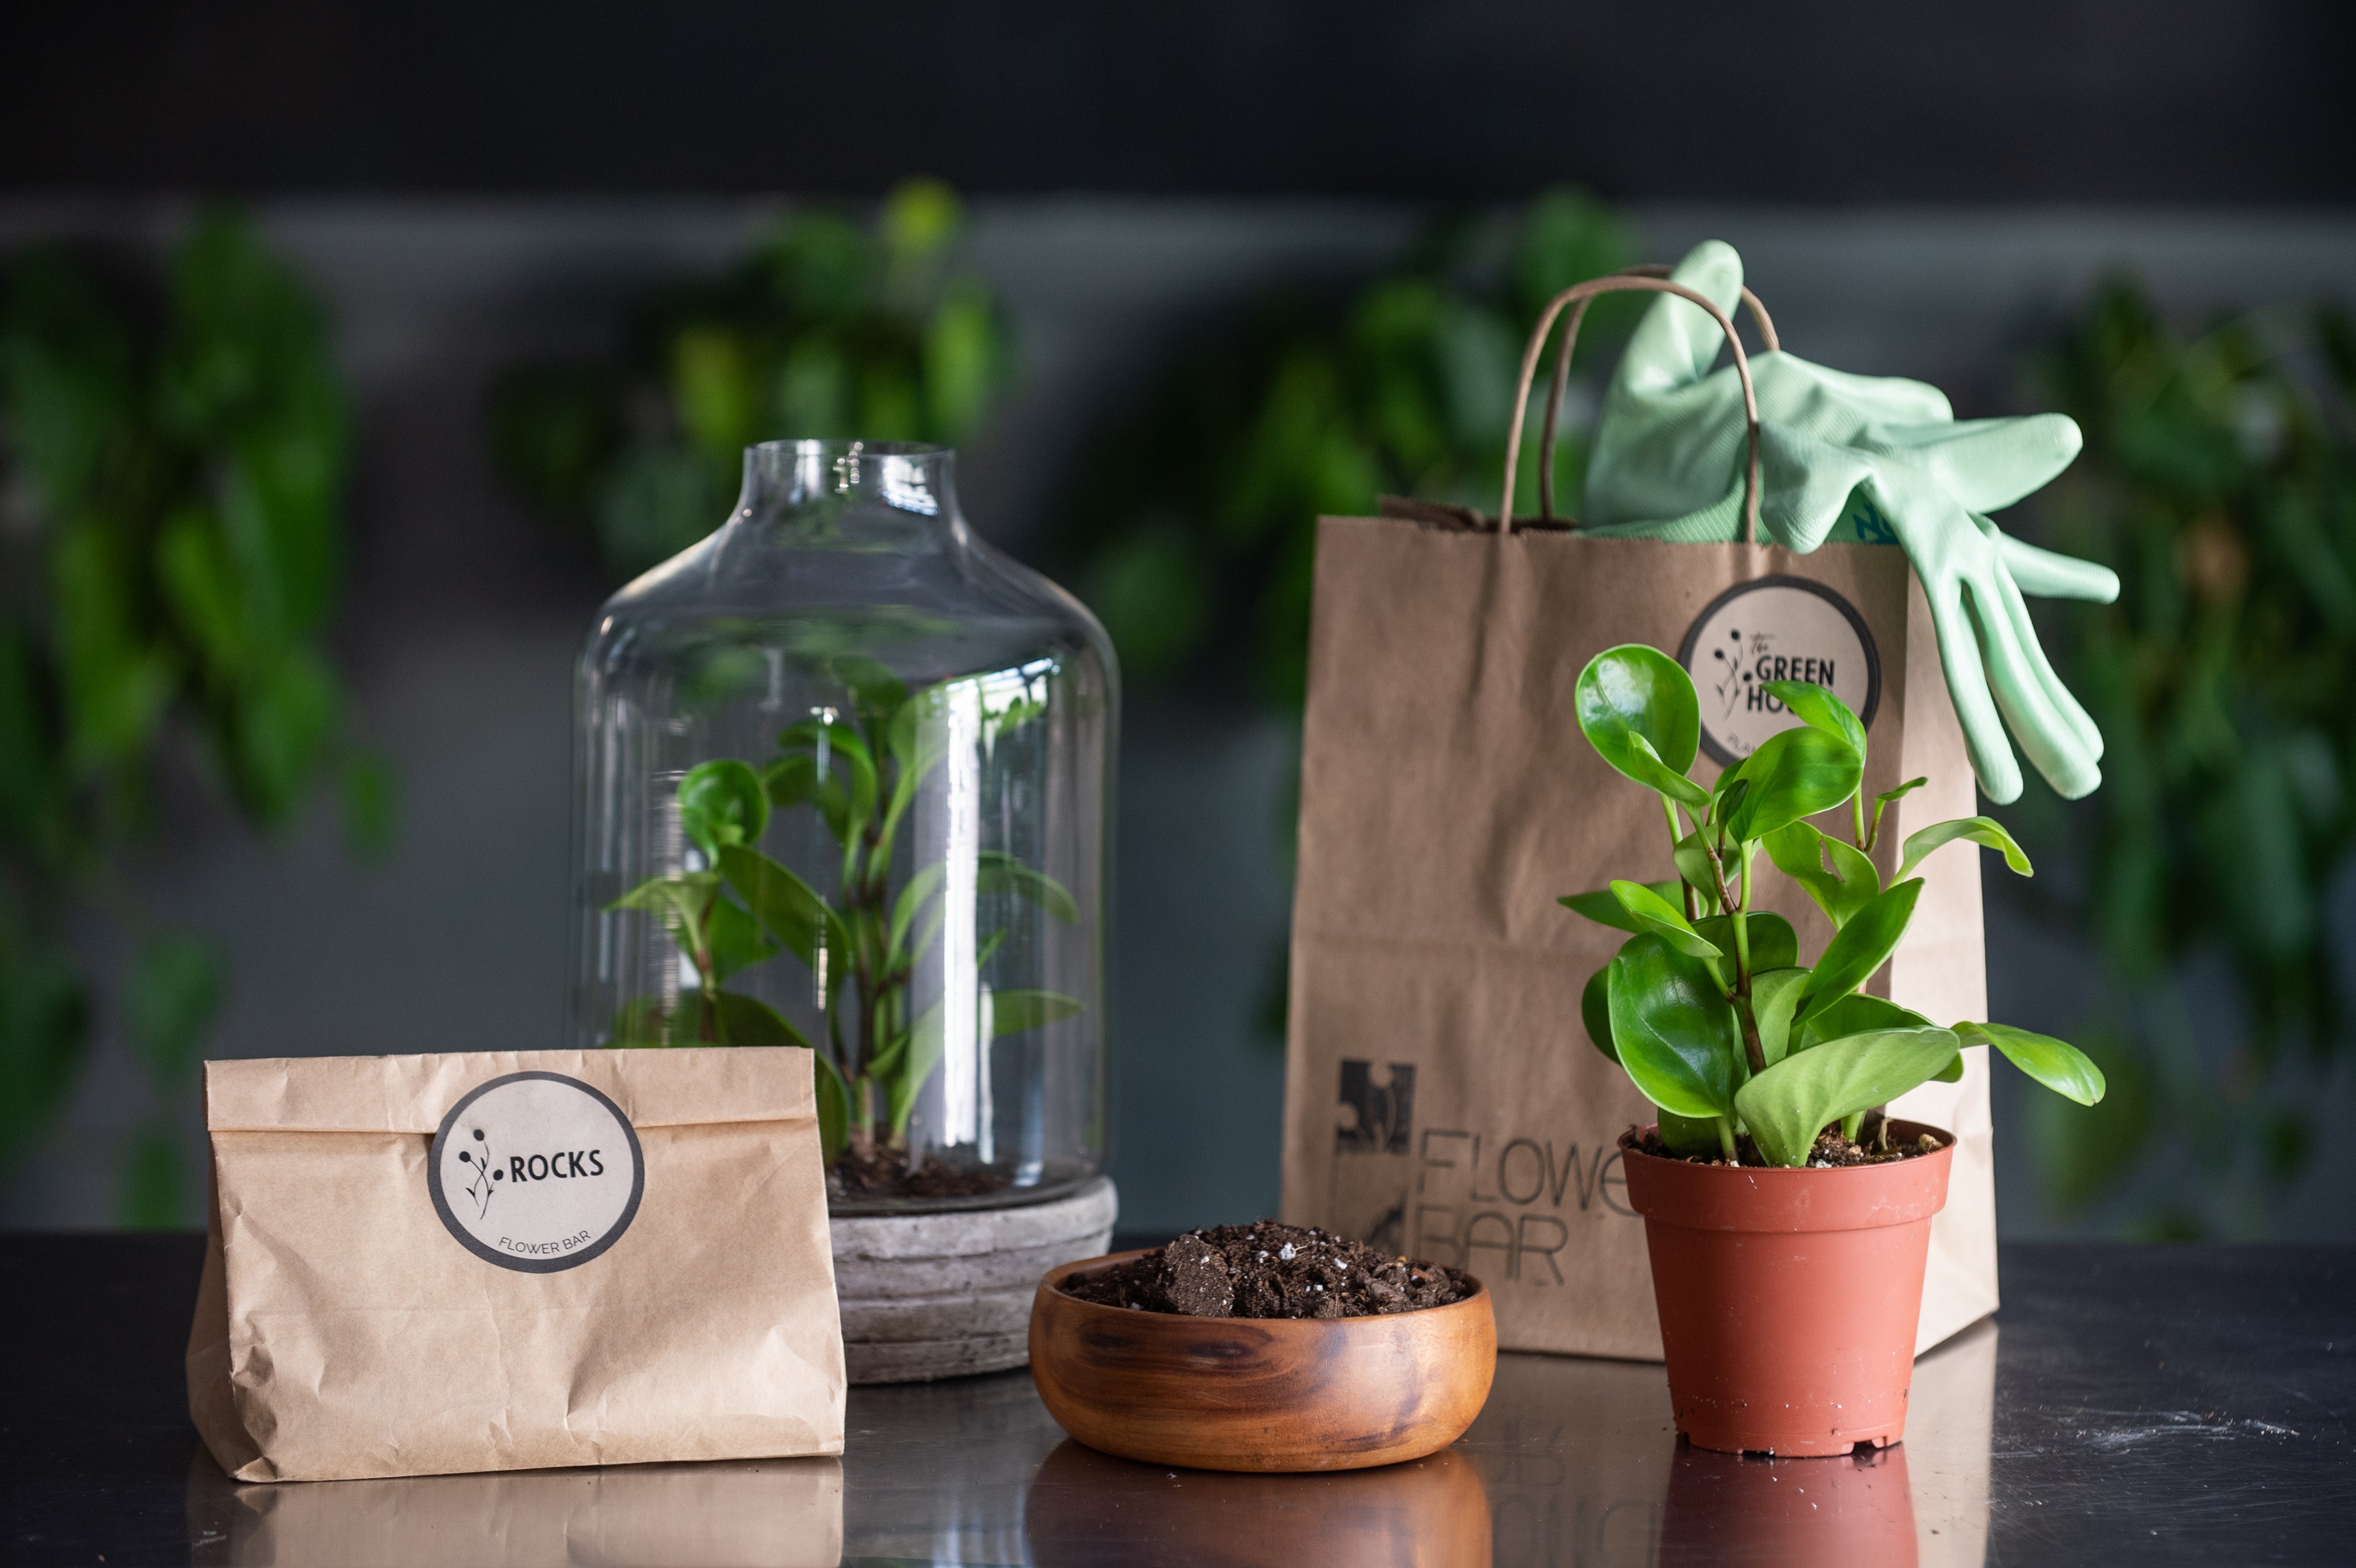 DIY Plant Kits to do at home